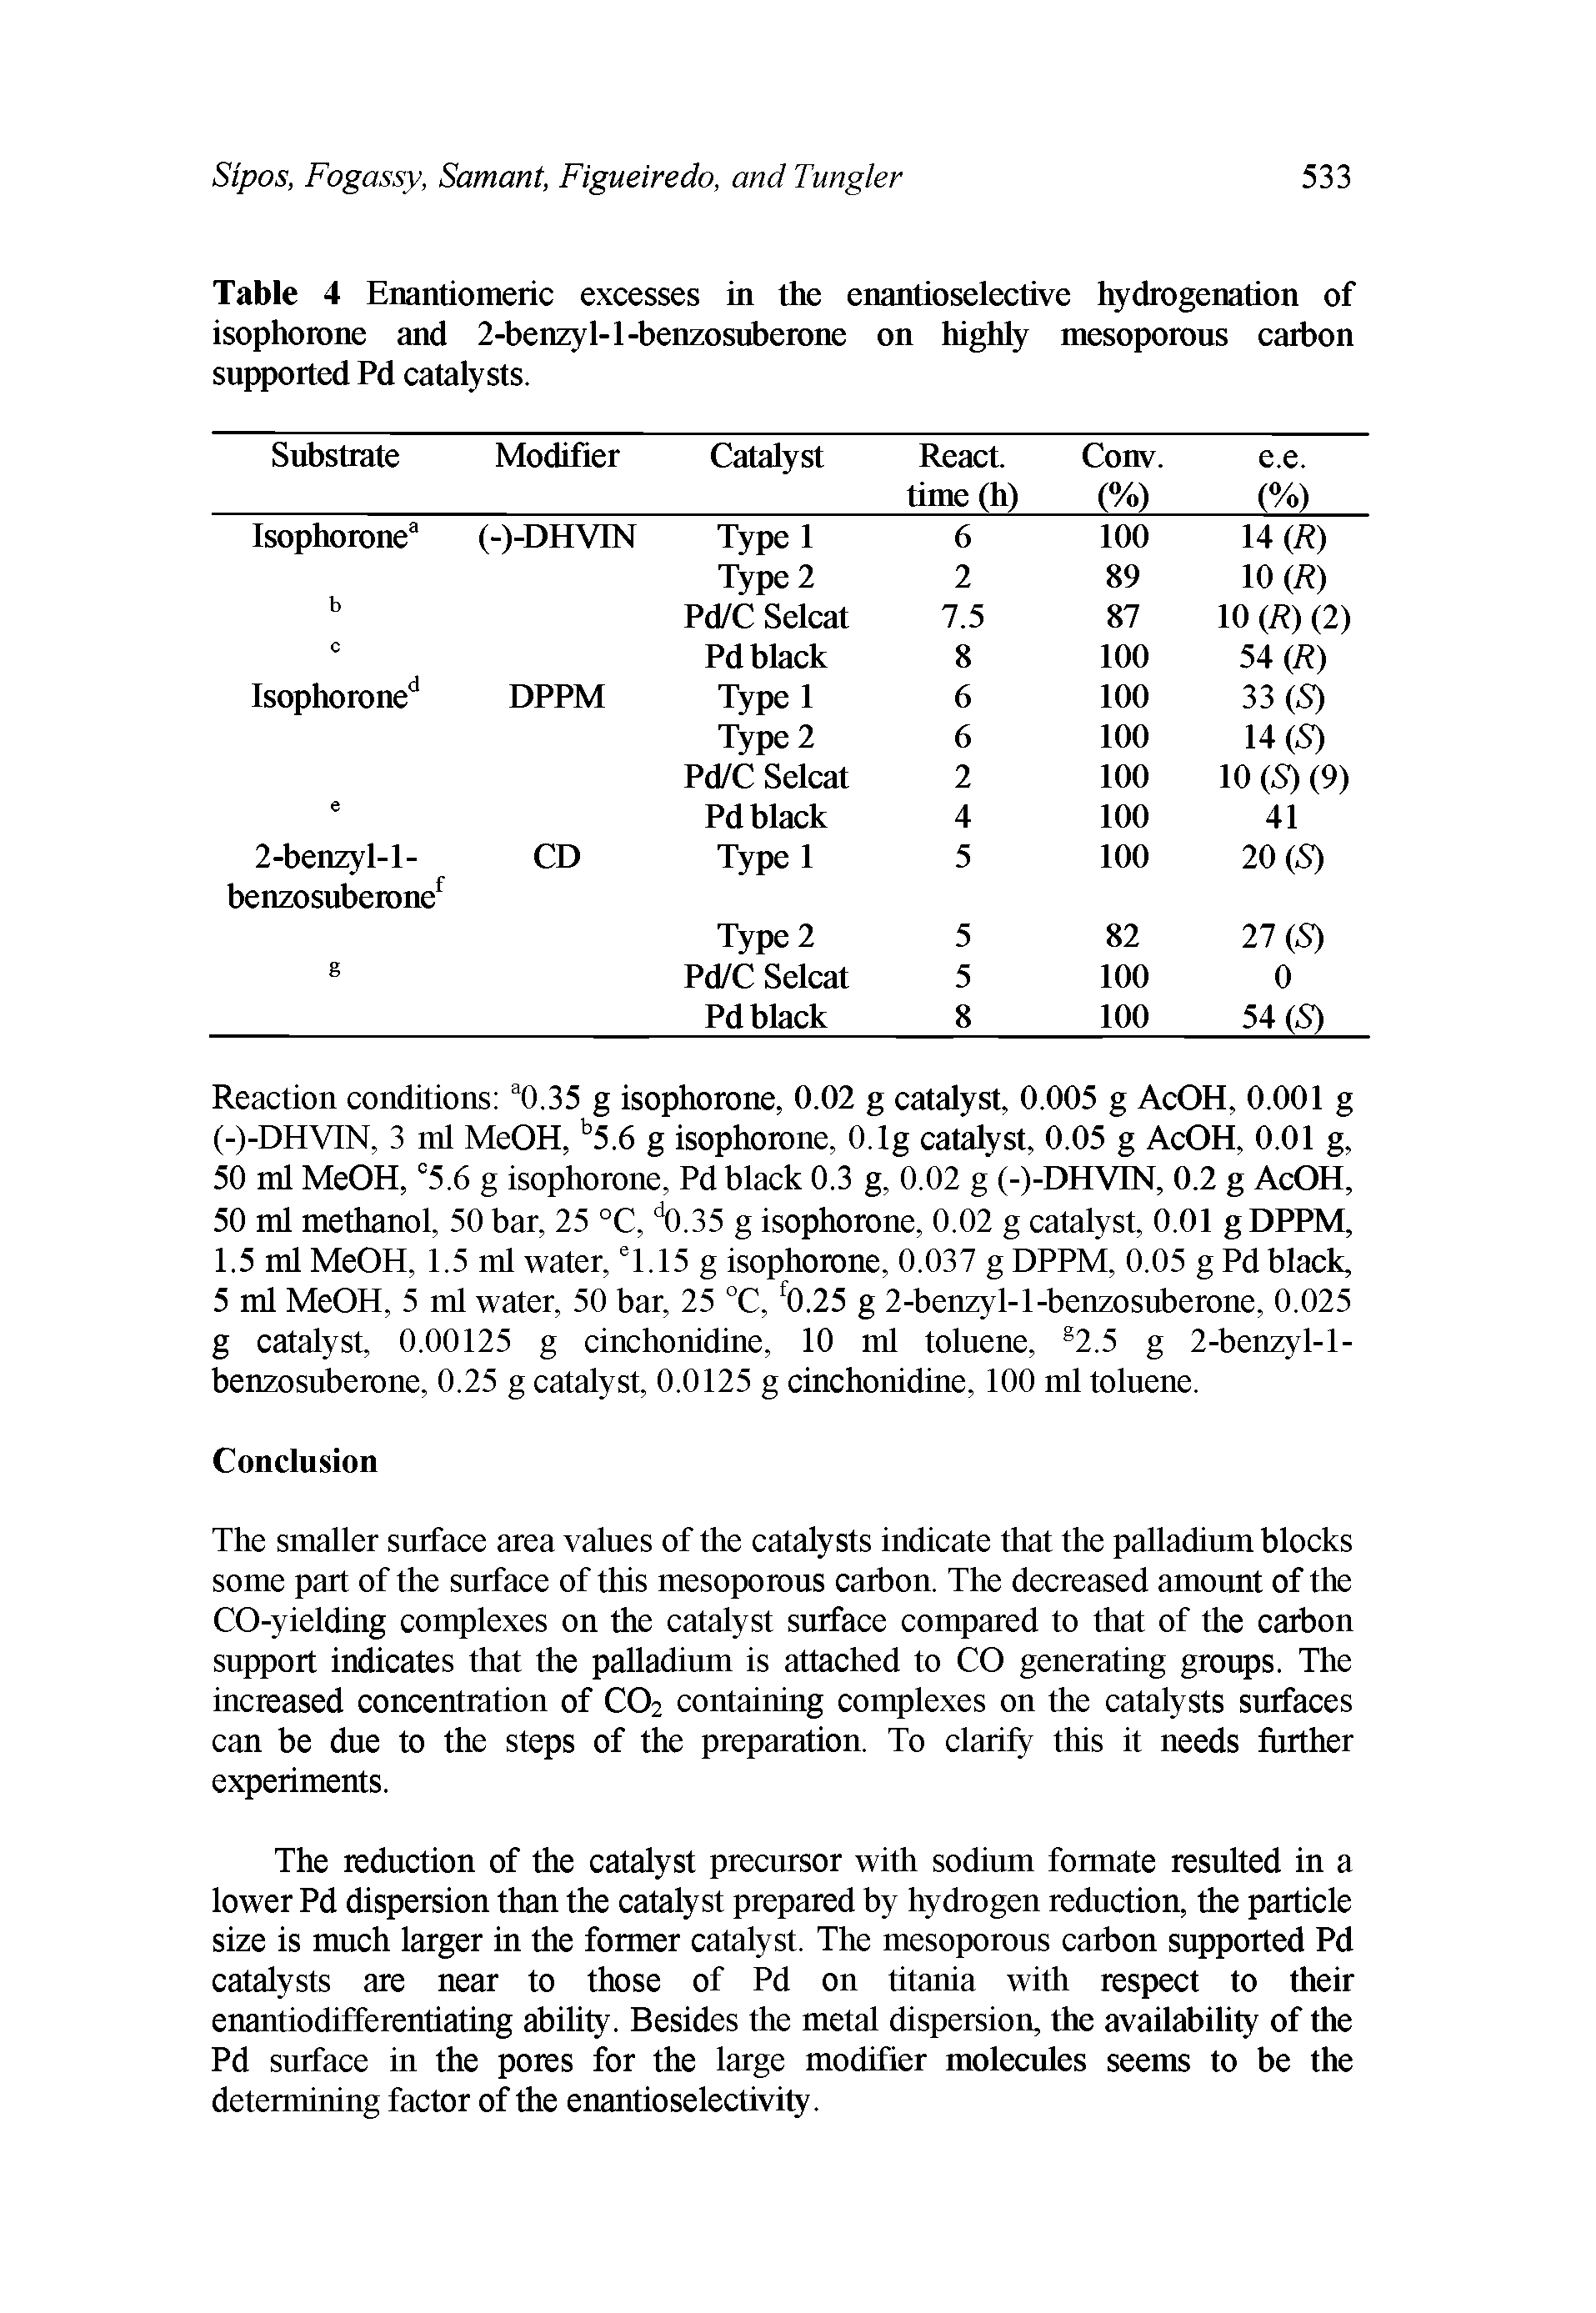 Table 4 Enantiomeric excesses in the enantioselective hydrogenation of isophorone and 2-benzyl- 1-benzosuberone on highly mesoporous carbon supported Pd catalysts.